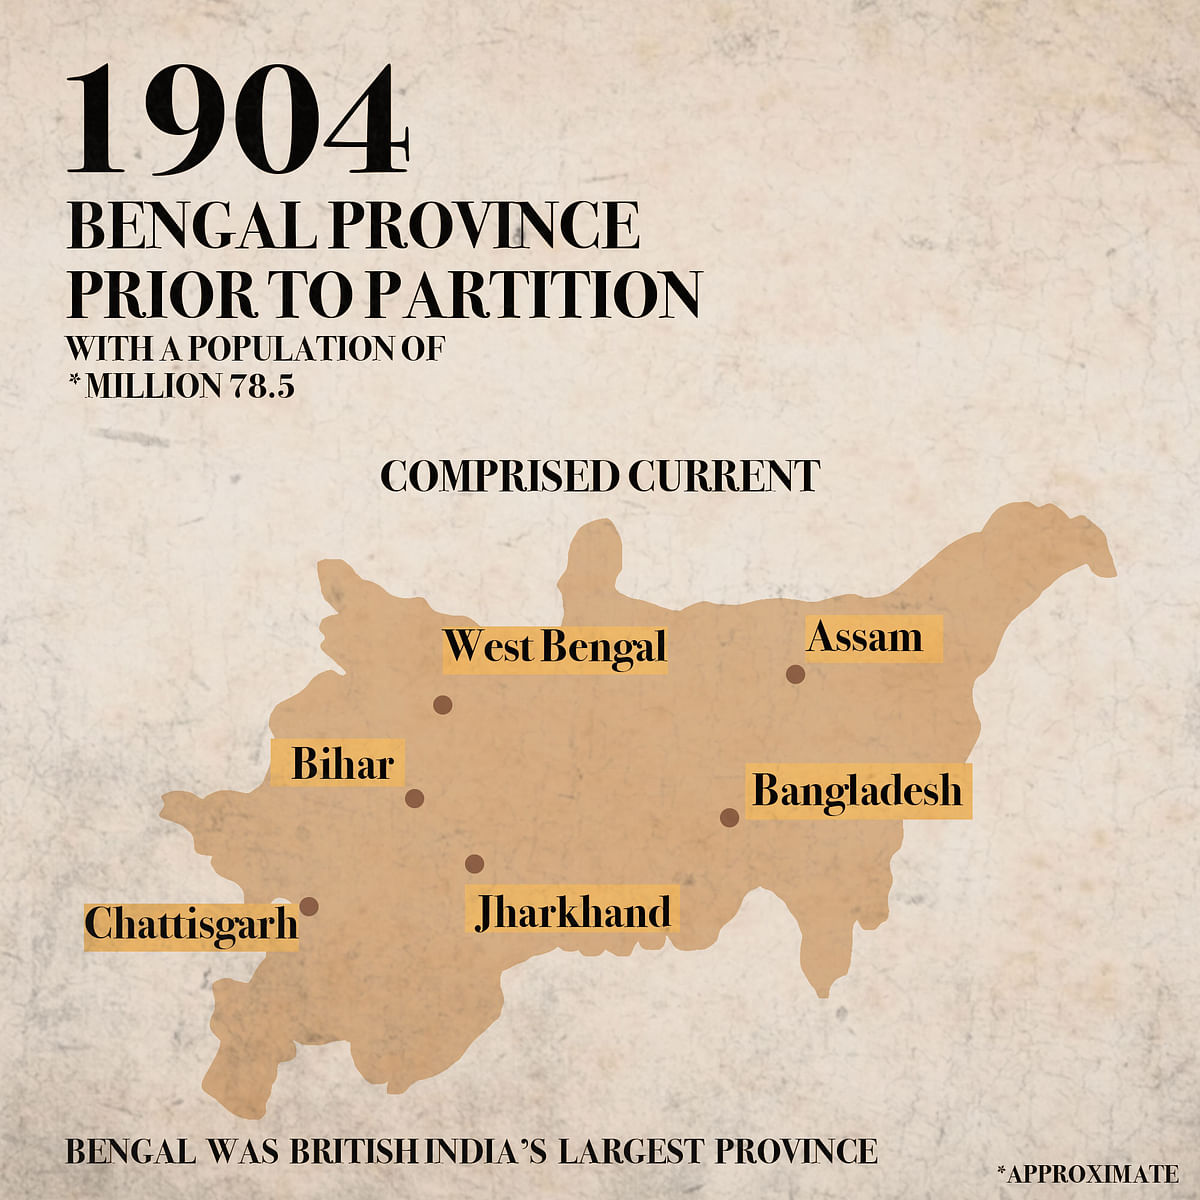  In 1905, Lord Curzon decided to divide Bengal, and in a well-planned move, it was partitioned on religious lines.